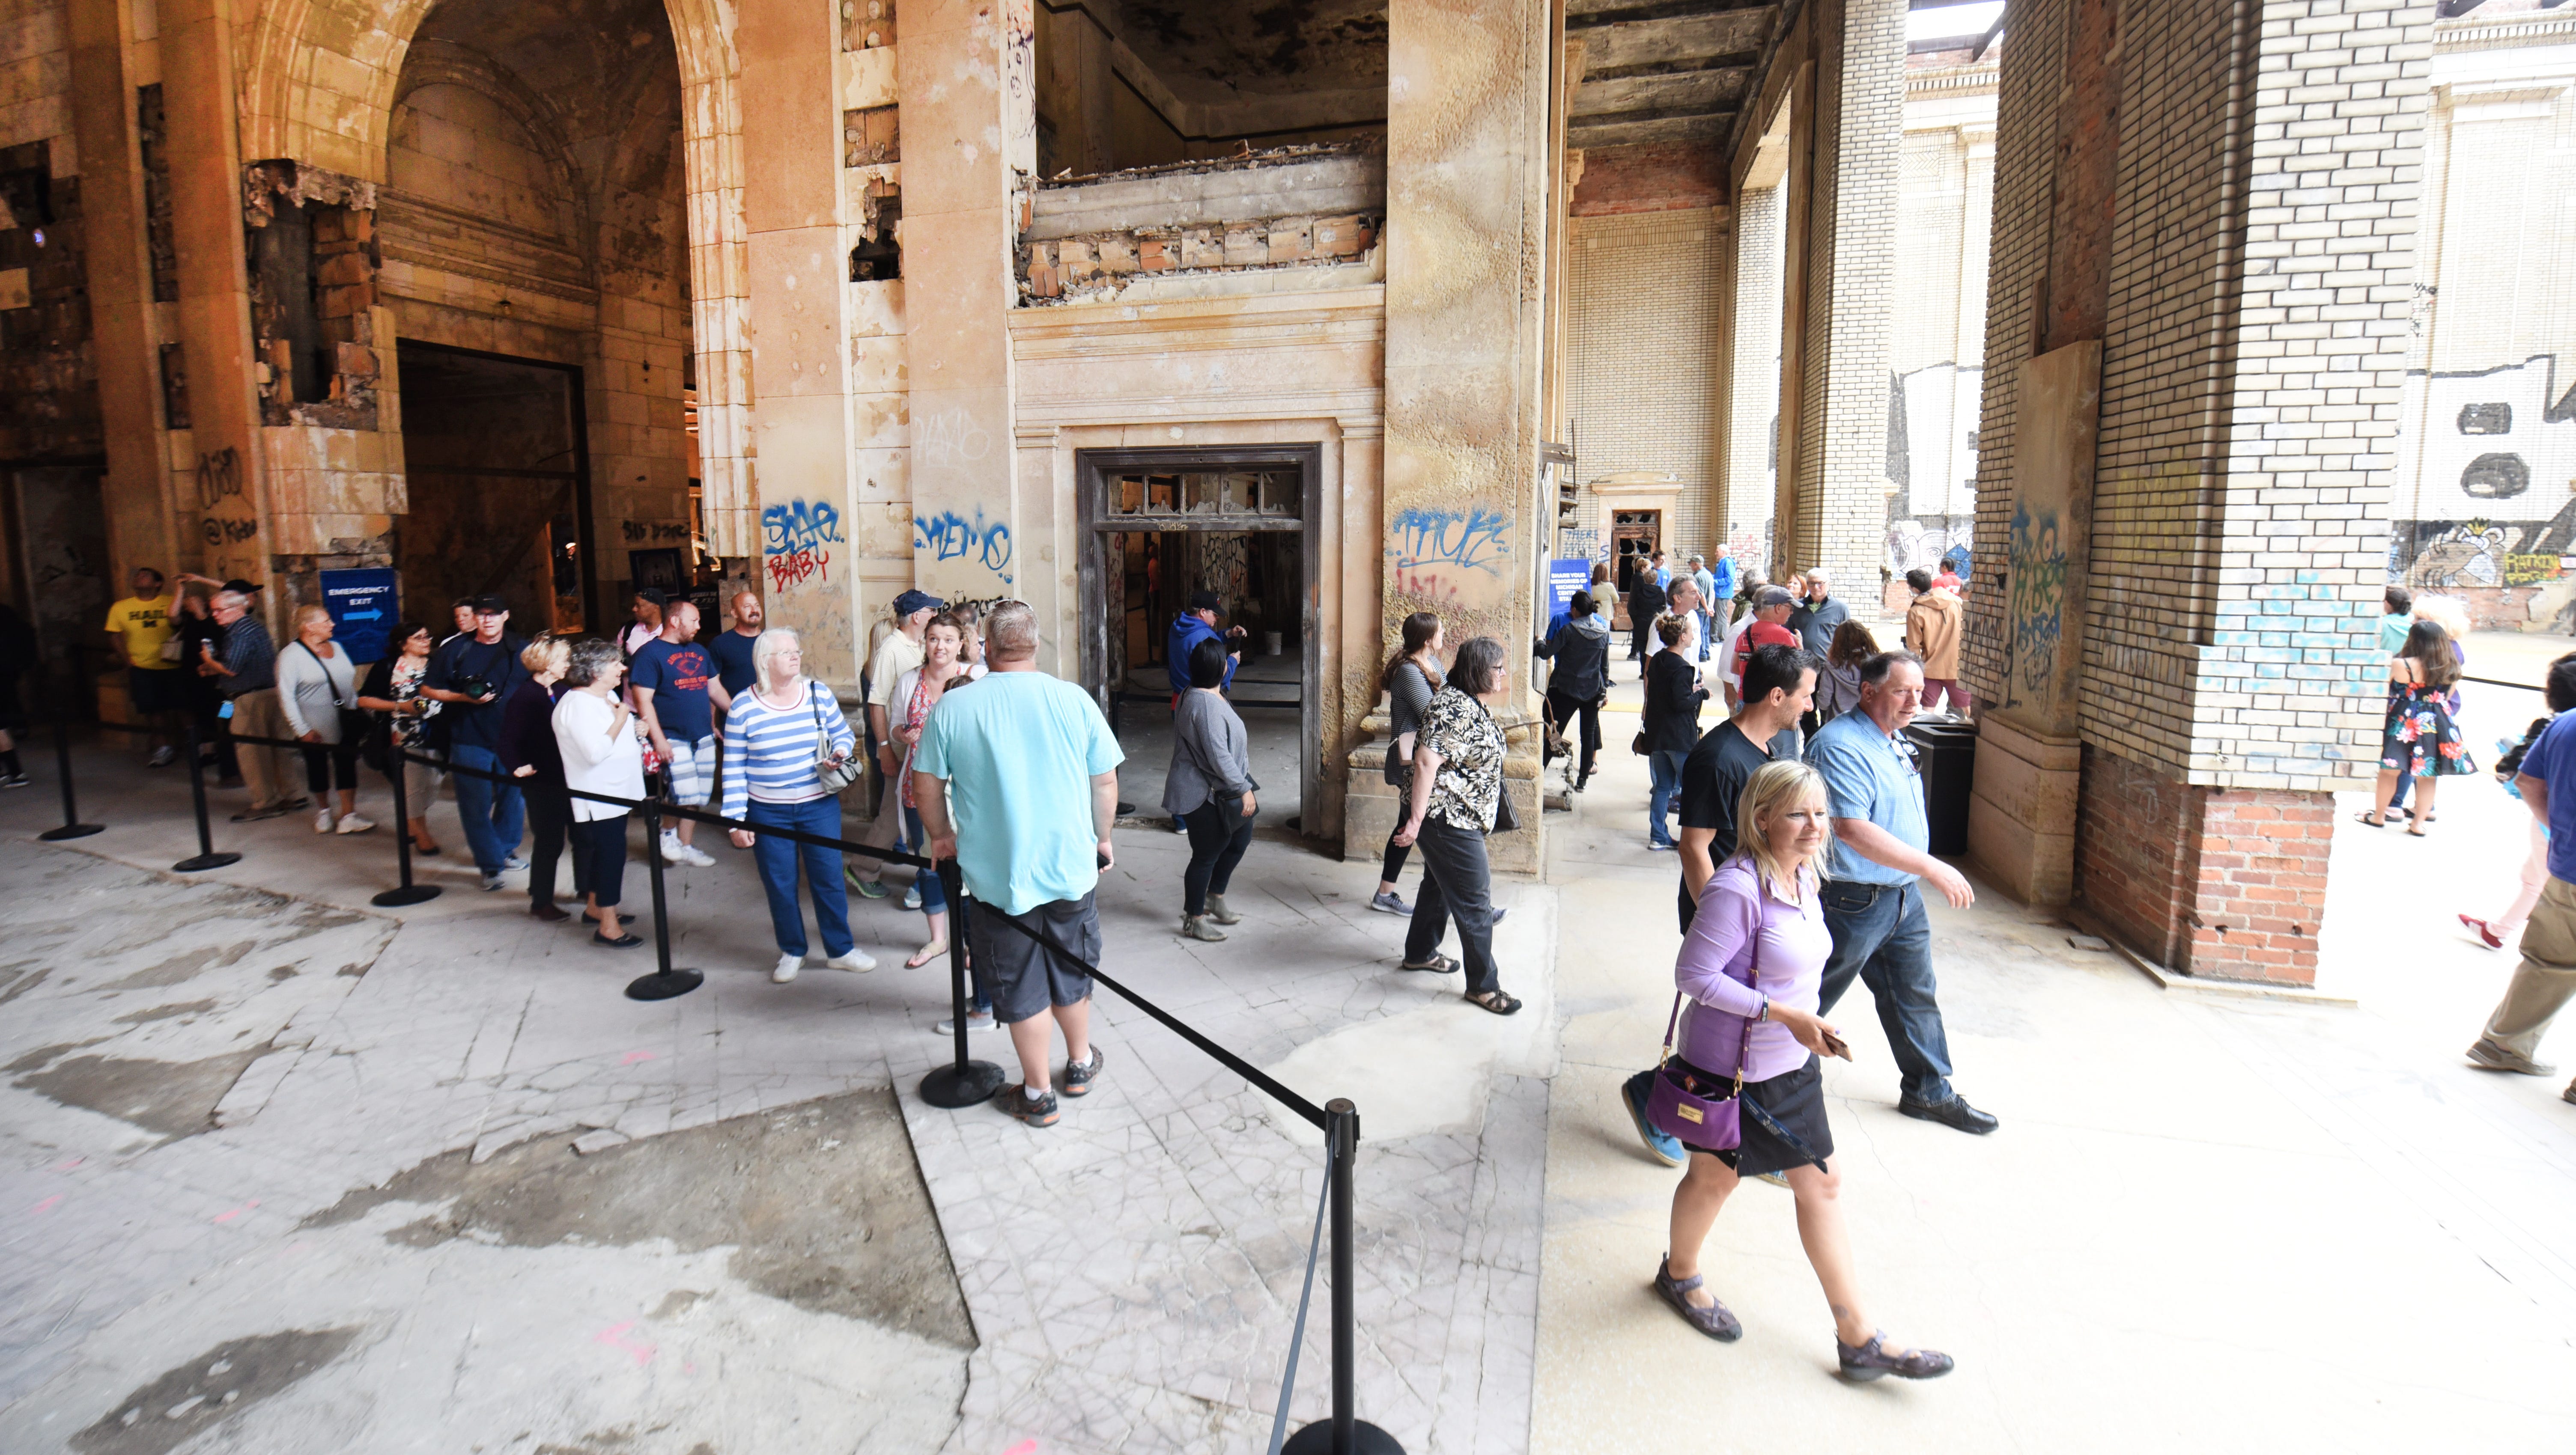 People walk through Michigan Central Train Depot as Ford Motor Company hosts a tour of the station during an open house.